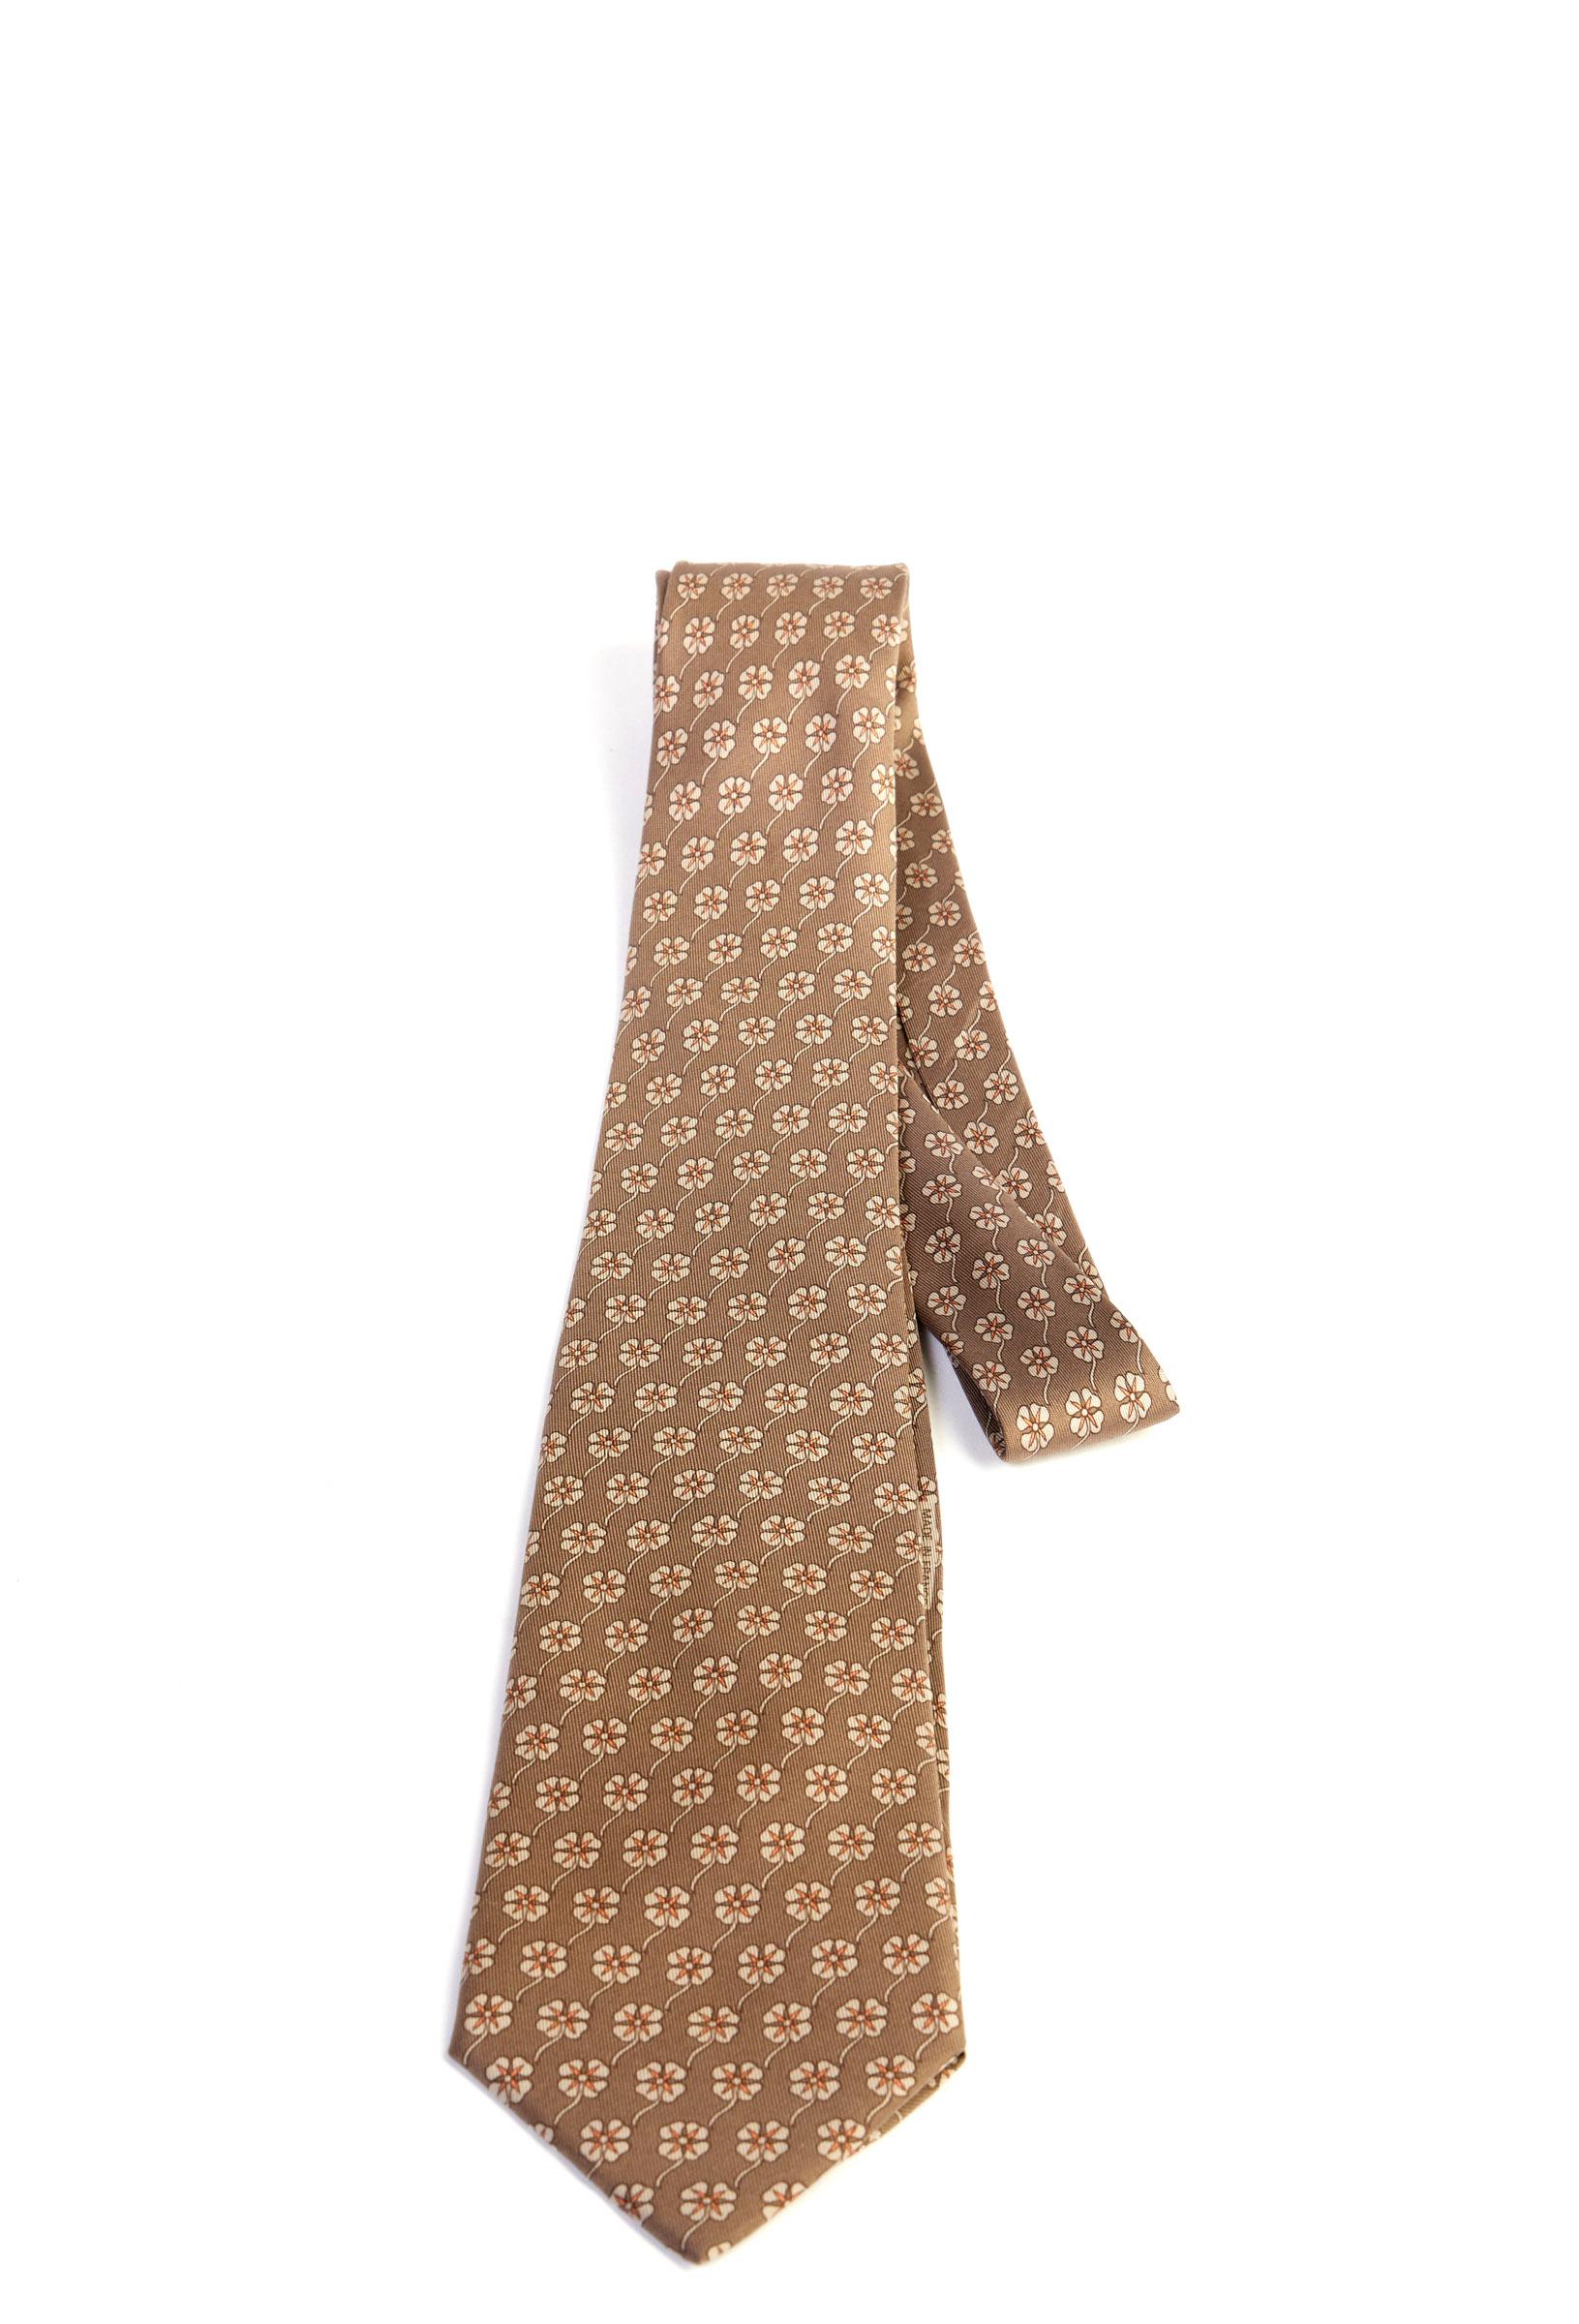 Hermes gentleman taupe silk tie and pocket square. Excellent condition.